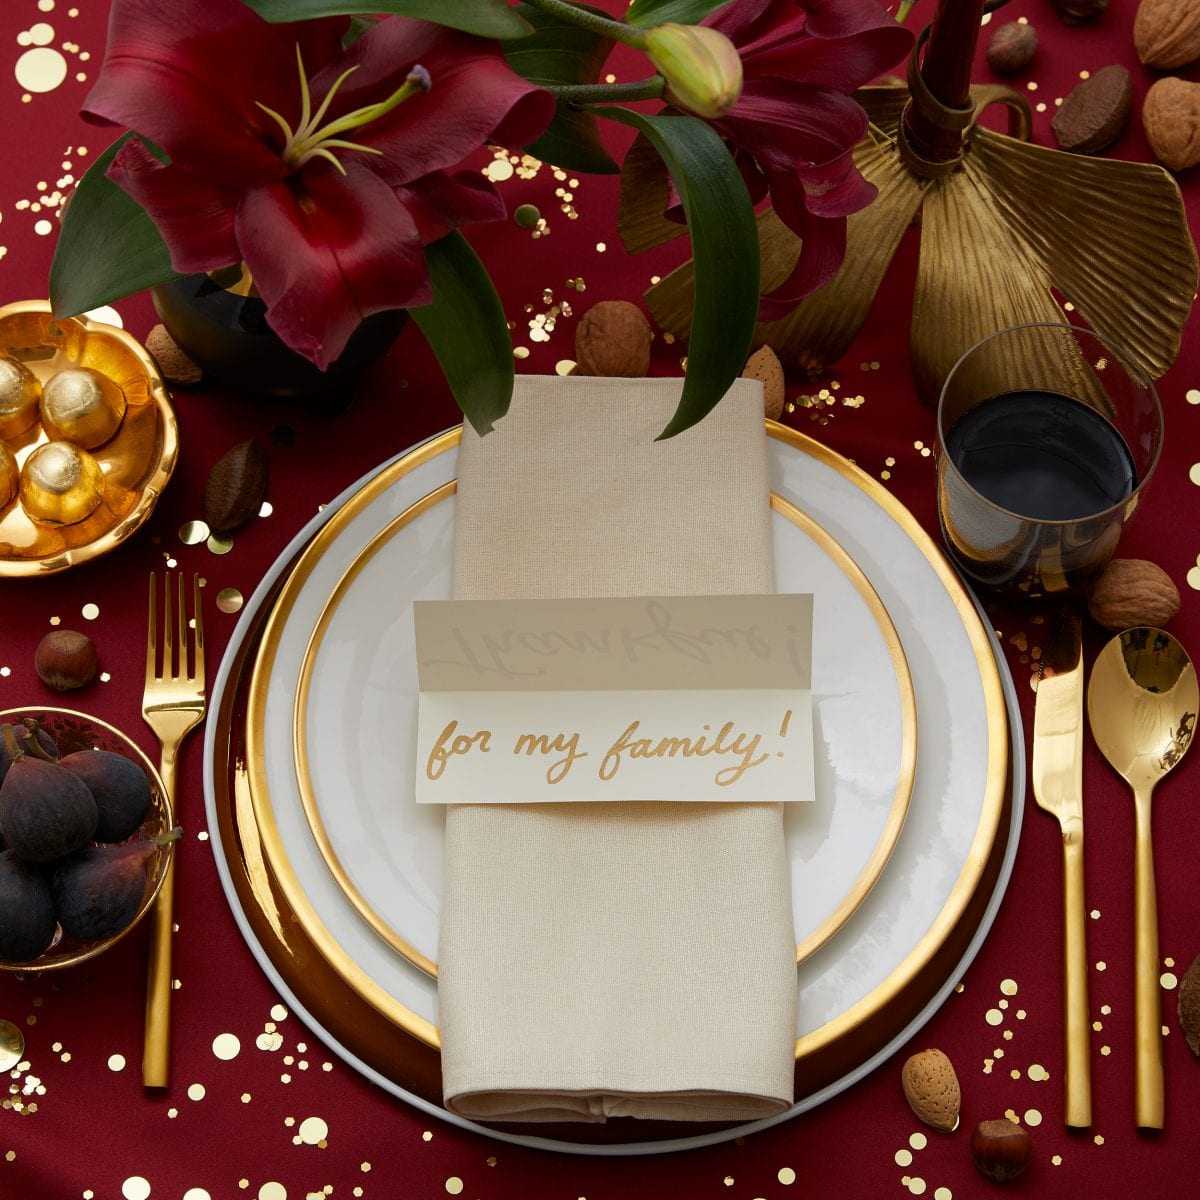 Thankful Table Card | Darcy Miller Designs Intended For Thanksgiving Place Card Templates